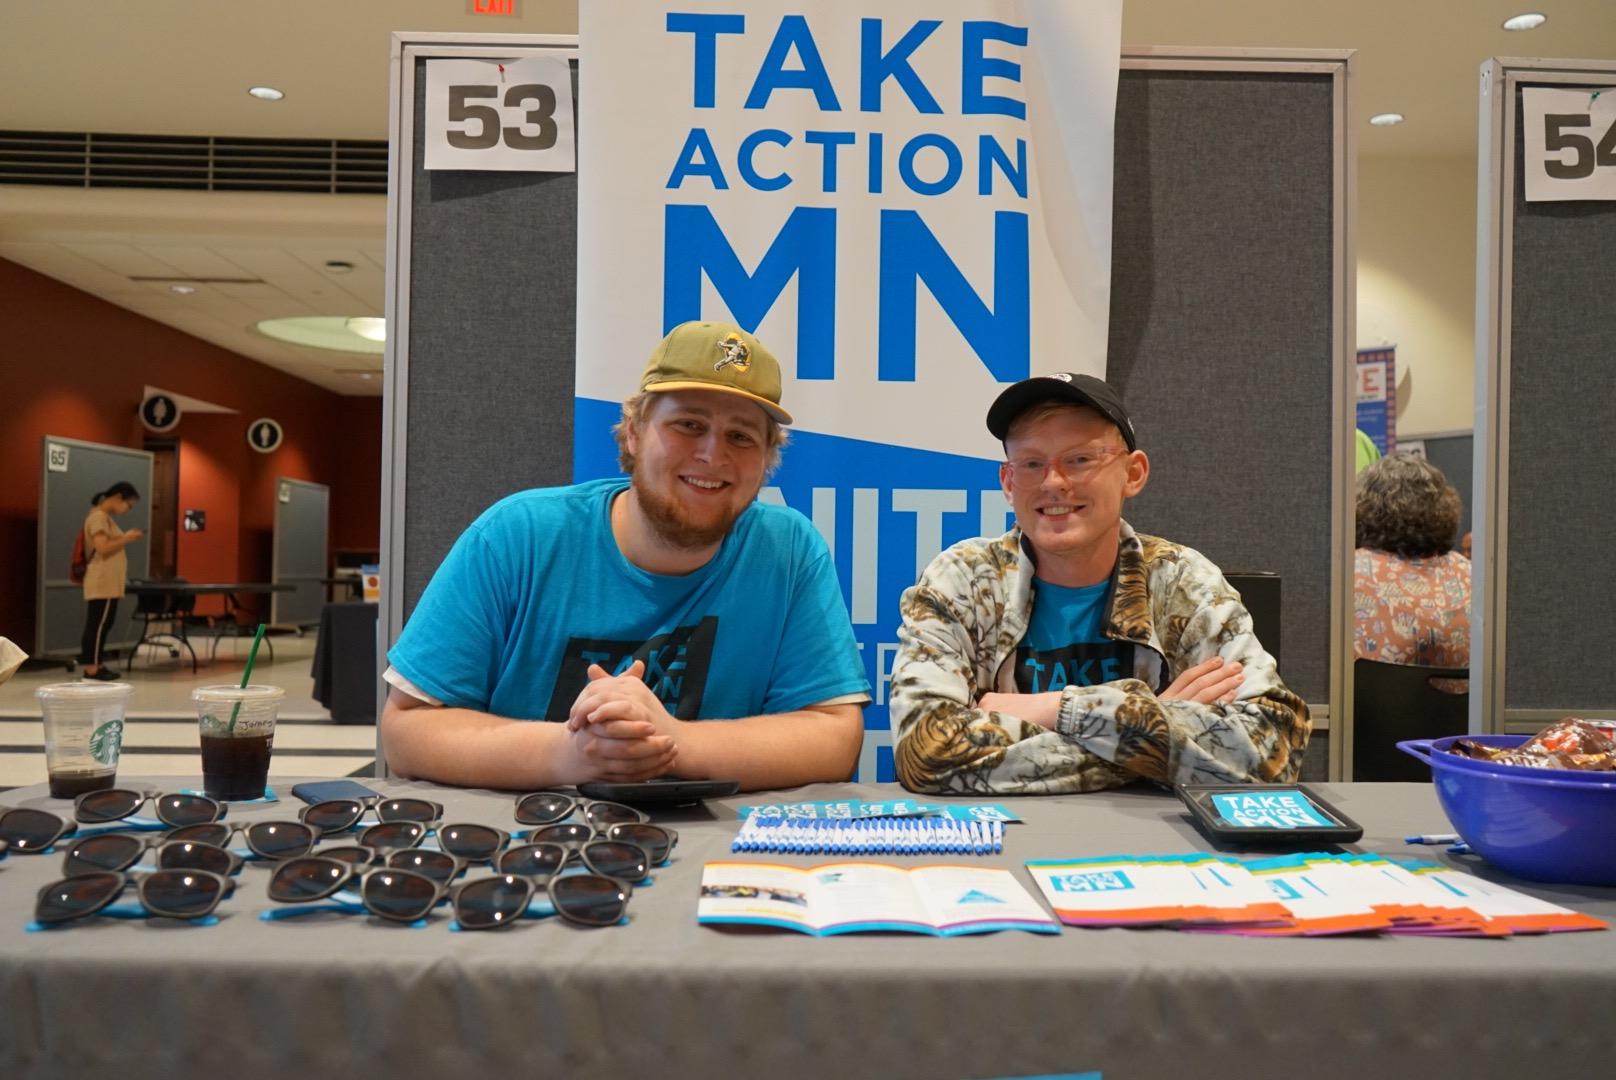 Take Action MN booth